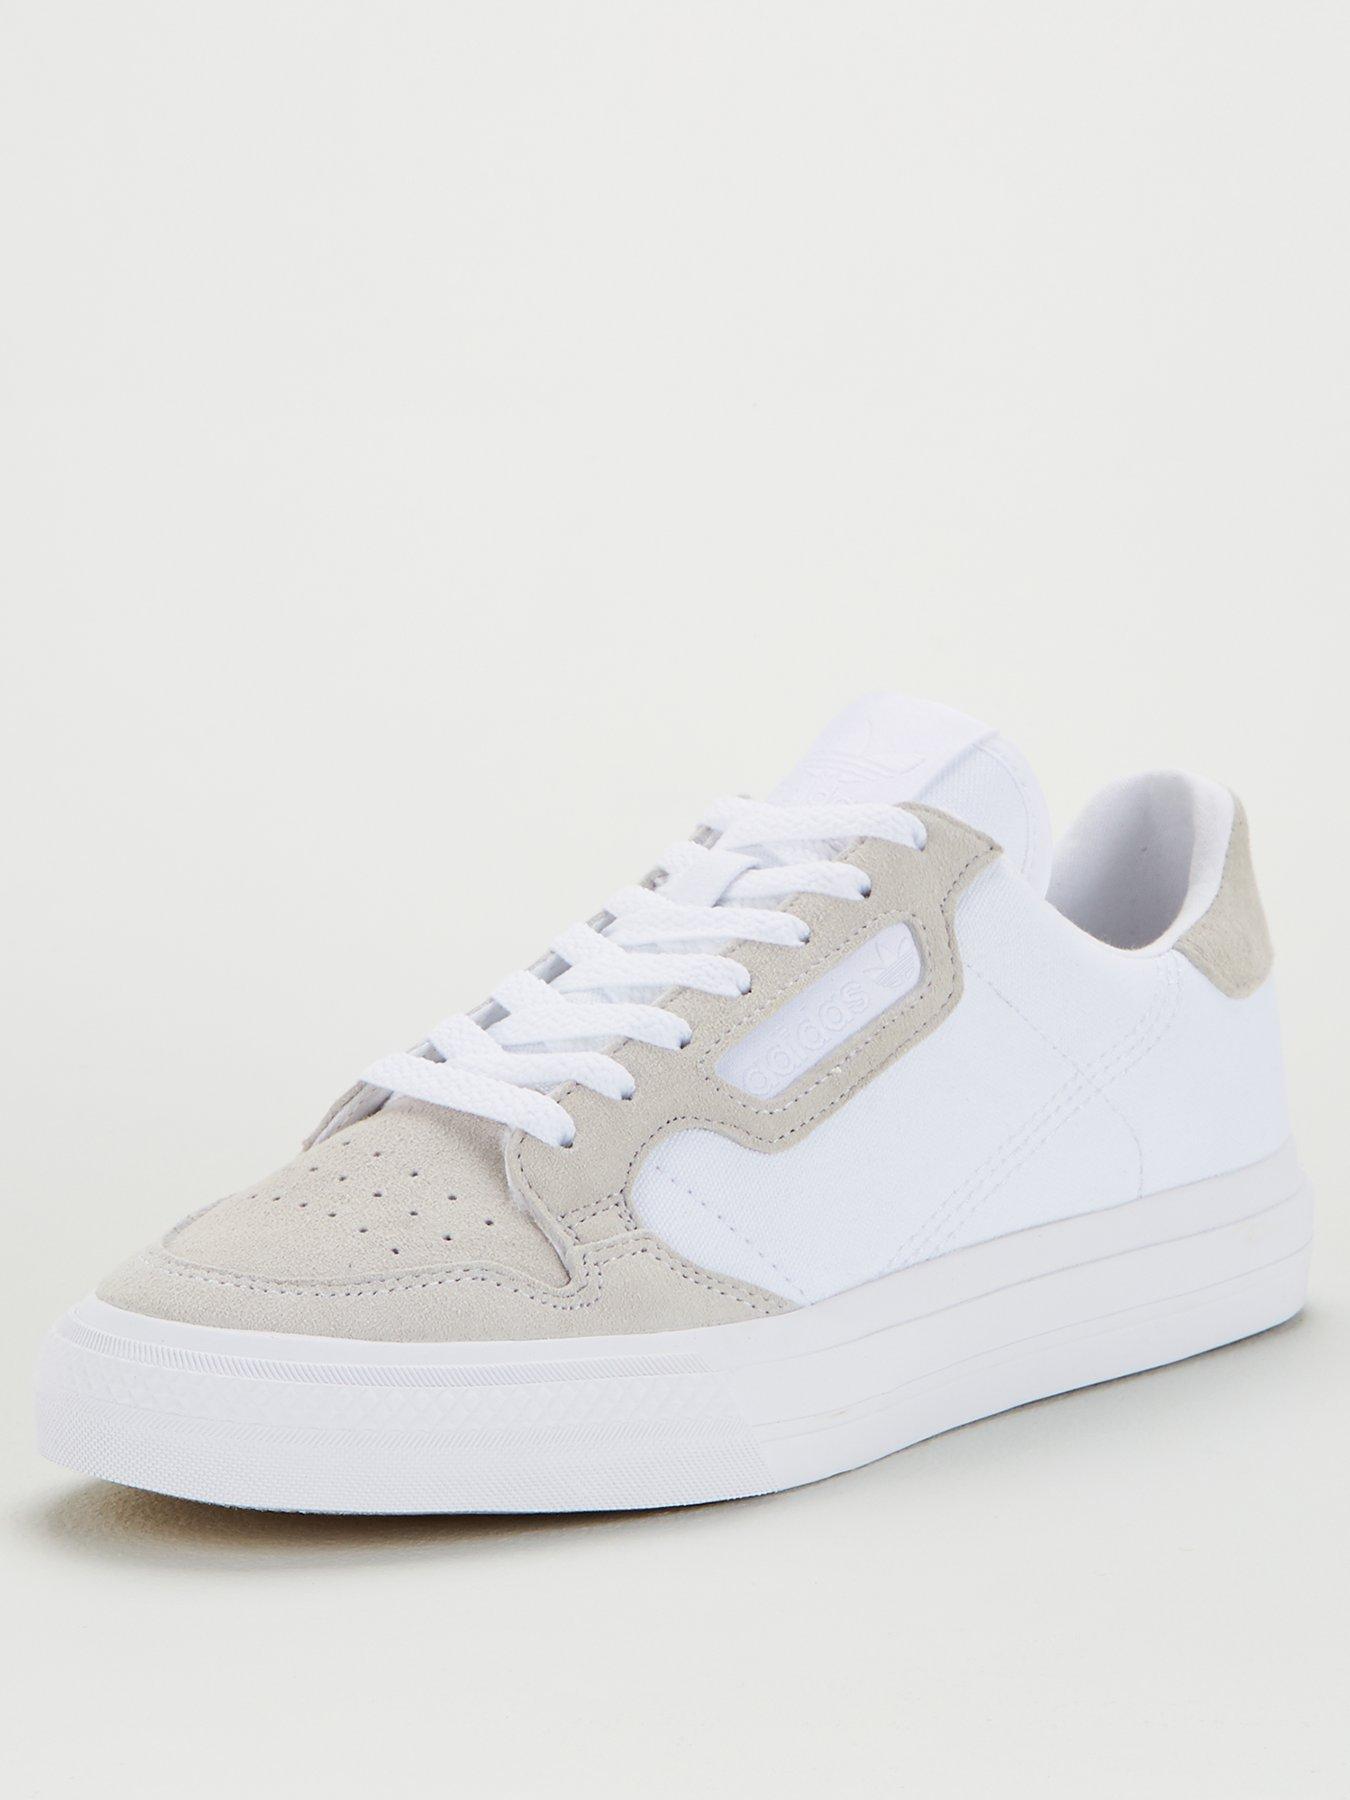 adidas originals continental vulc trainers in white with suede trim